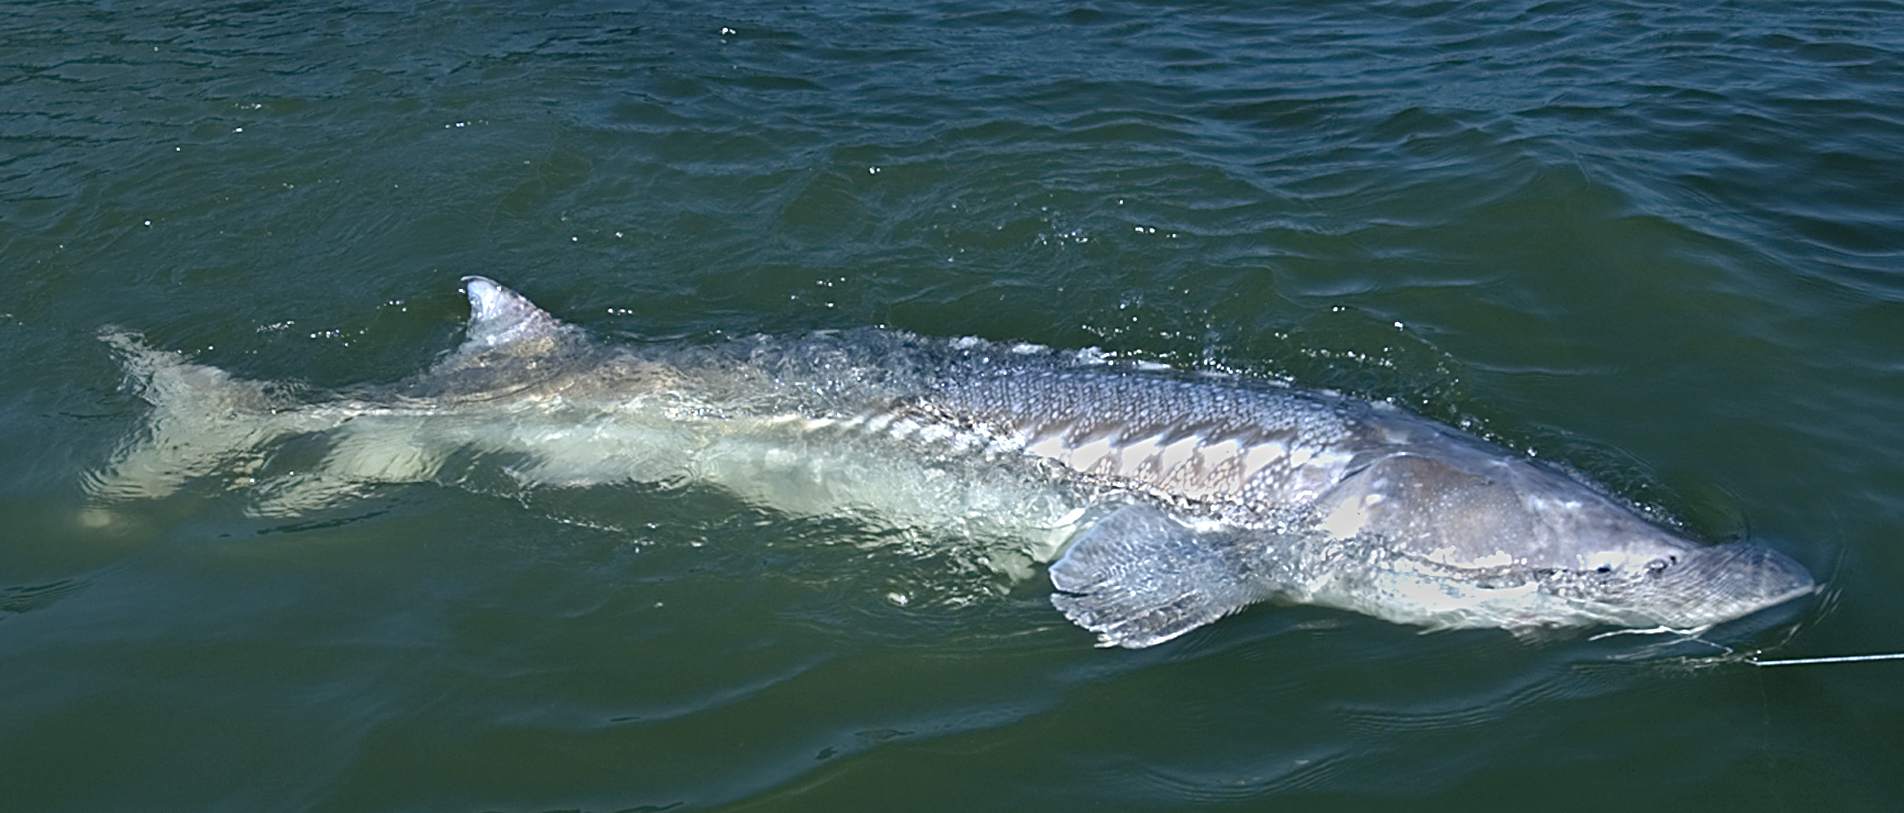 With fork tails and massive bodies, big sturgeon, look like toothless sharks coming to the boat.